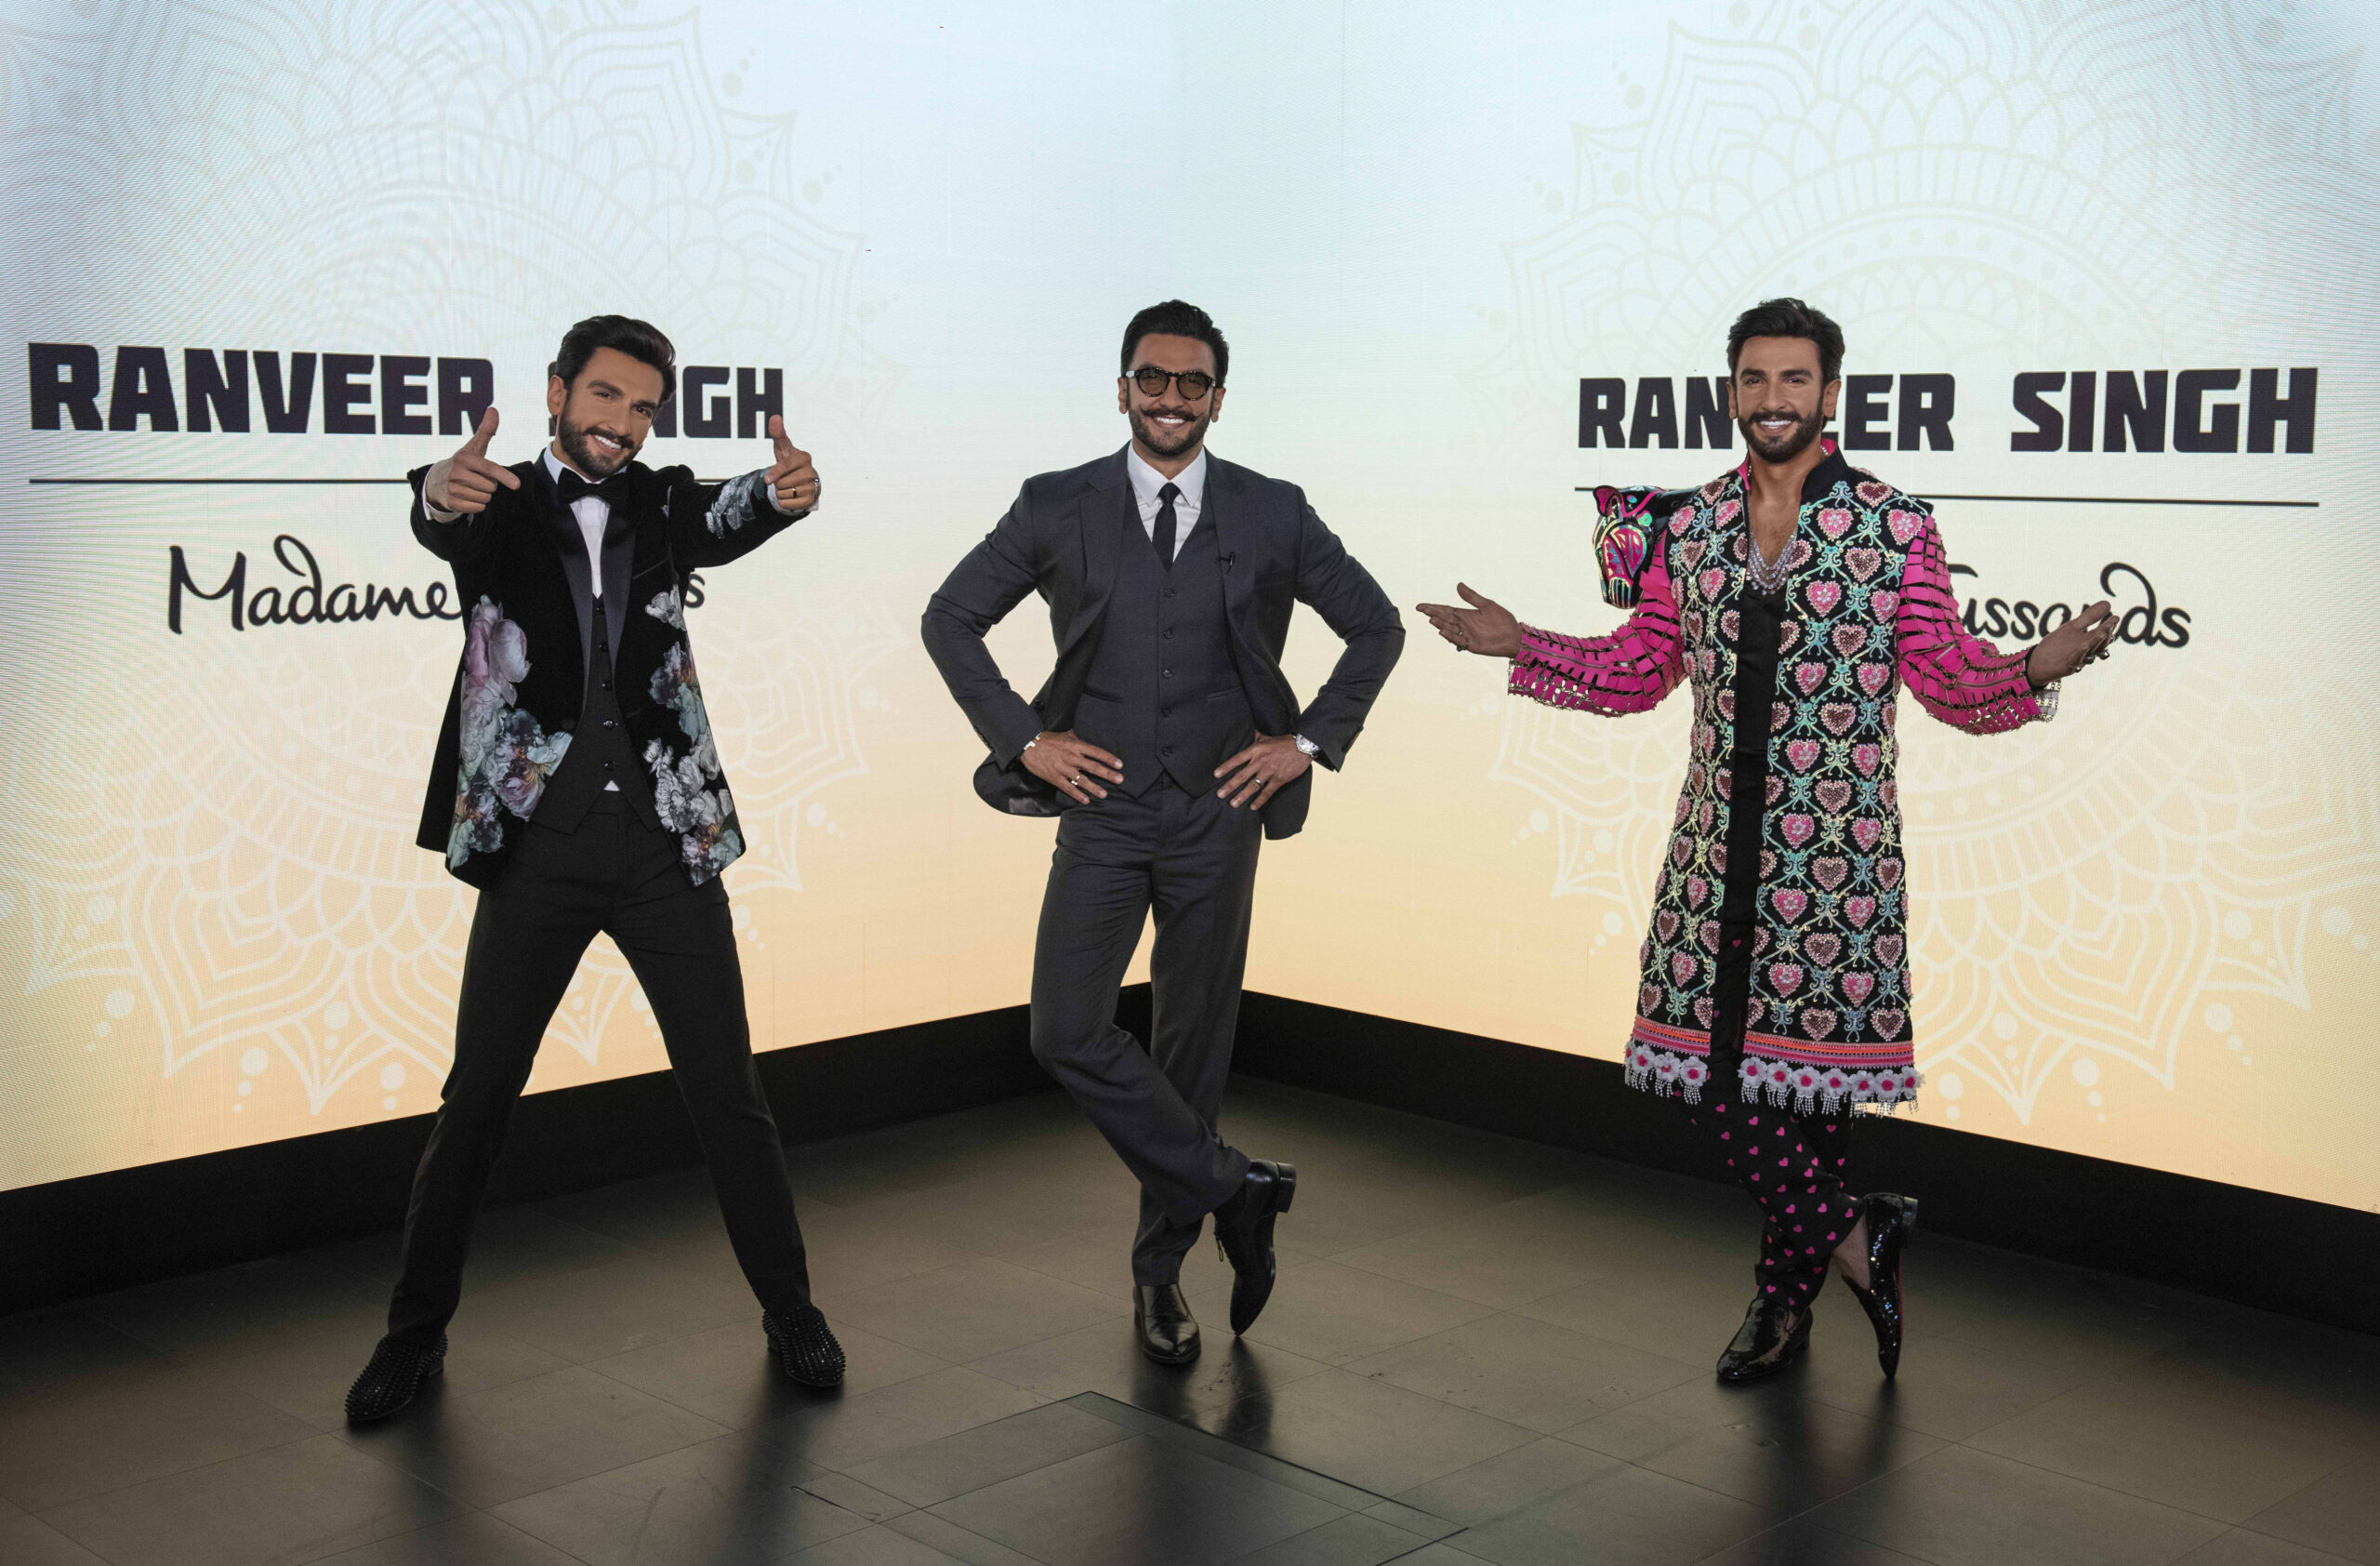 BOLLYWOOD LANDS IN LONDON: RANVEER SINGH LAUNCHES NEW MADAME TUSSAUDS FIGURES